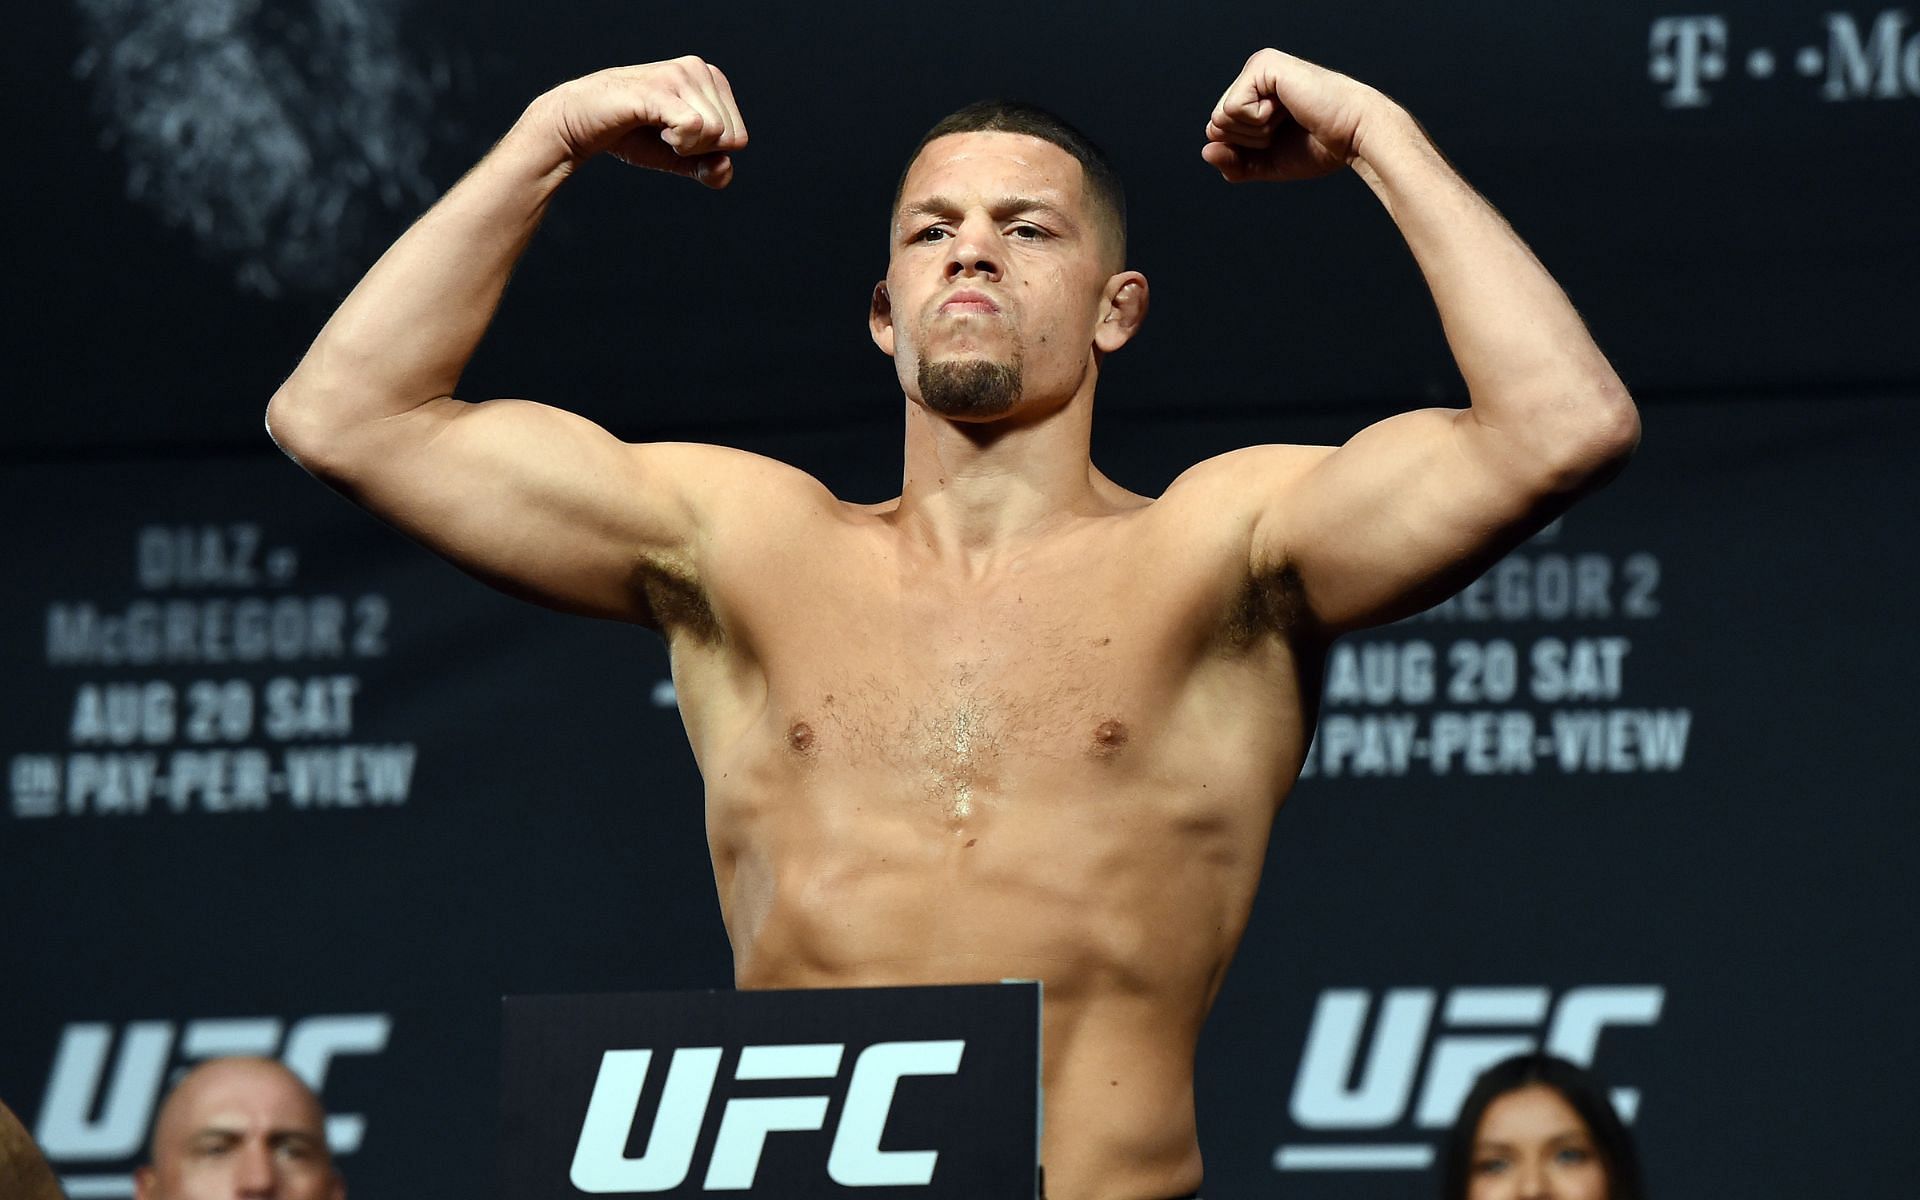 MMA superstar Nate Diaz at the weigh-in ahead of his UFC 202 rematch with fellow fan favorite Conor McGregor in August 2016